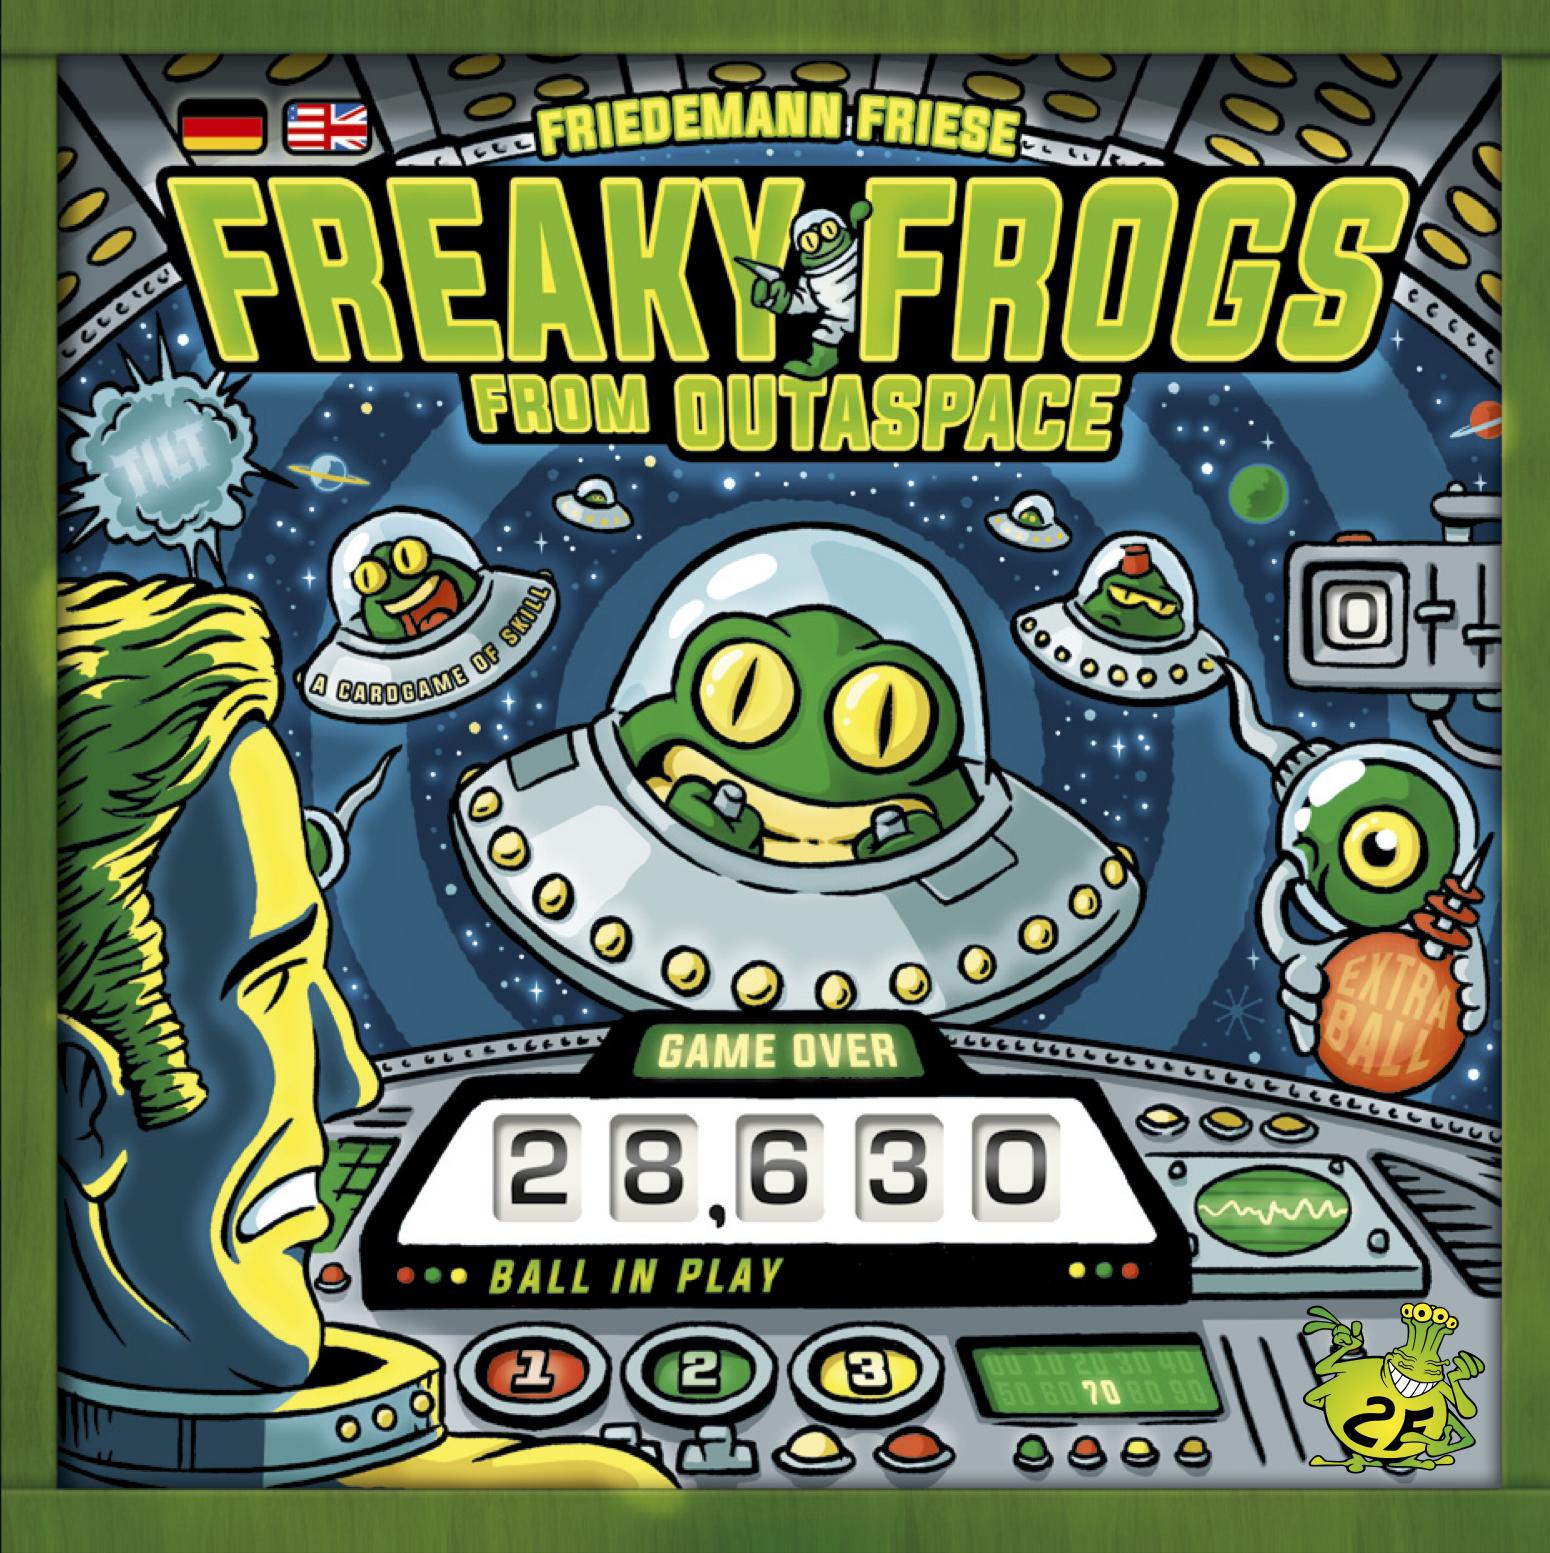 Freaky Frogs from Outerspace